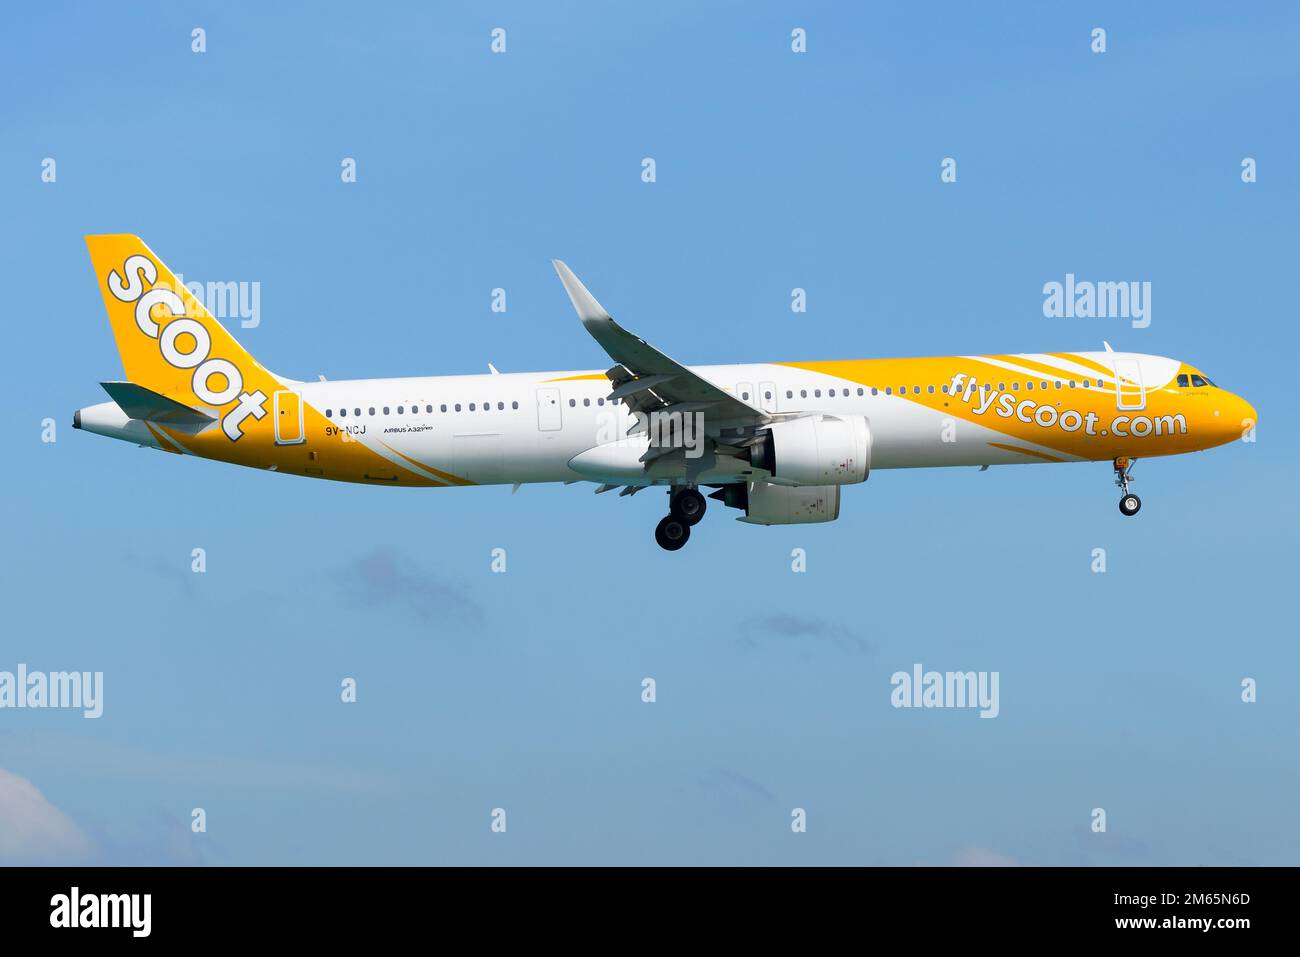 Scoot Airbus A321 airplane flying. Aircraft A321neo of Scoot Airlines. Stock Photo